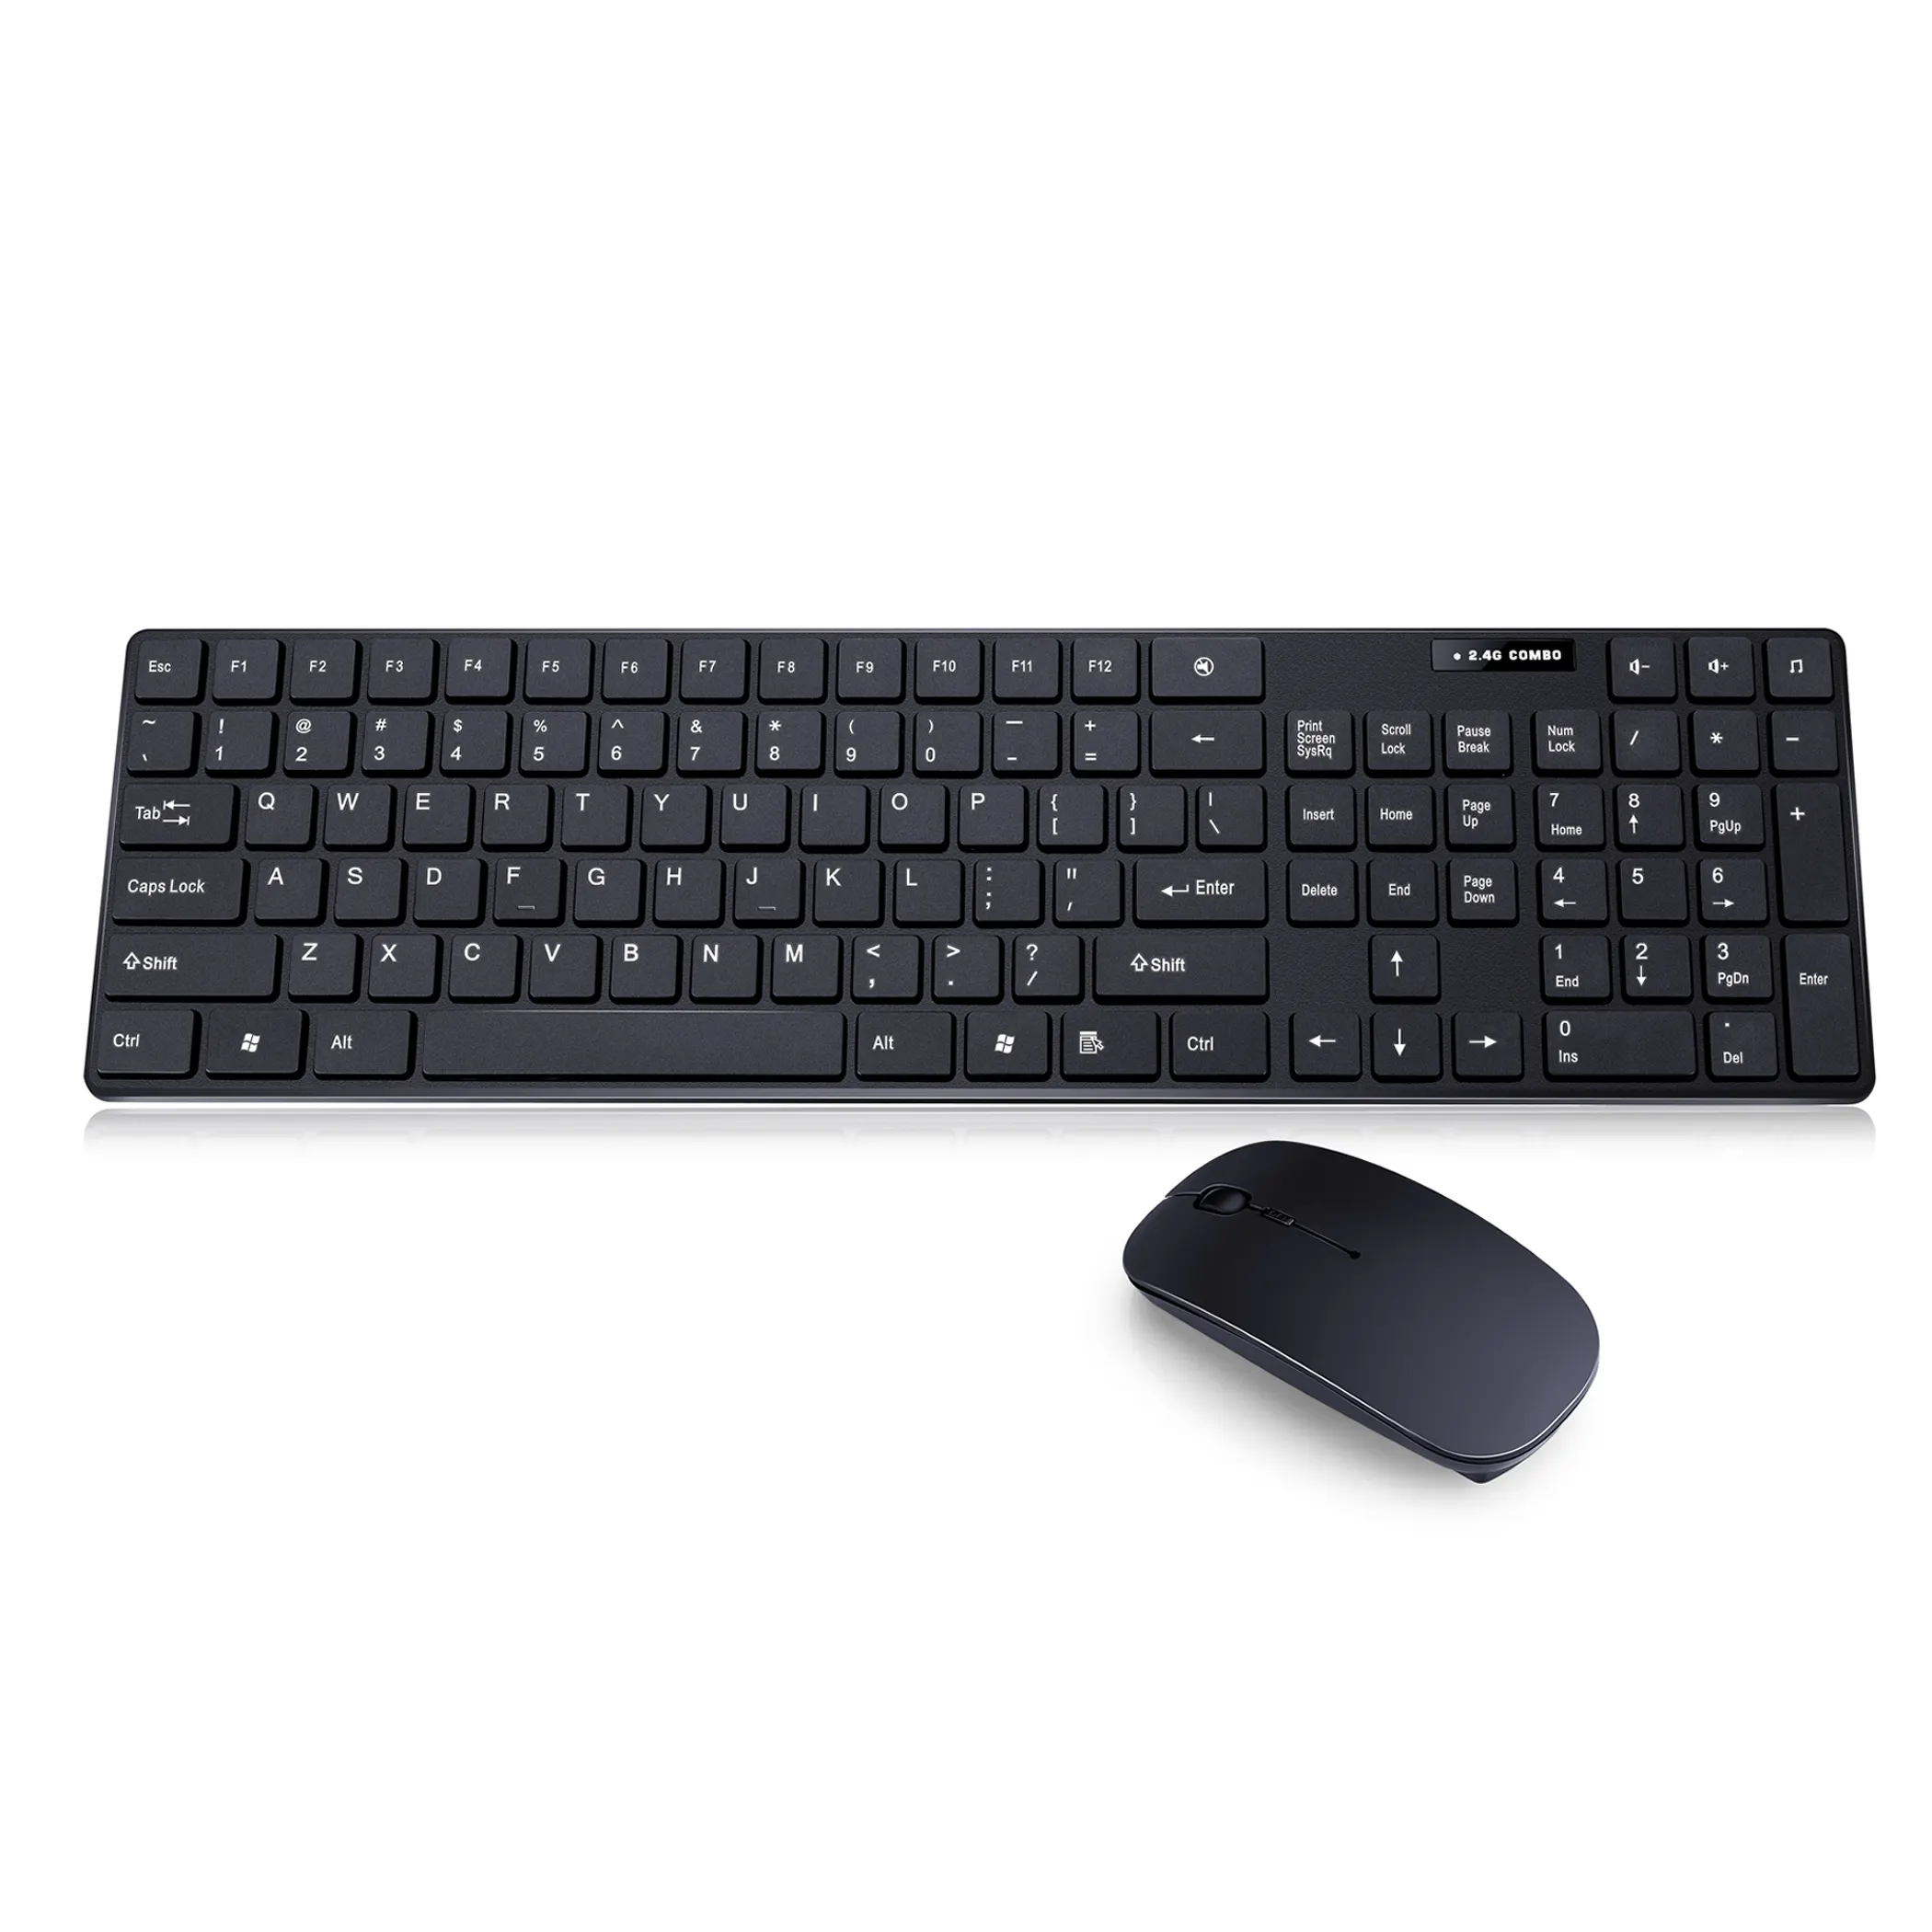 BWBL Wholesale Slim 2.4G Wireless Plug And Play Home Office Computer Keyboard and Mouse For Office Home Use